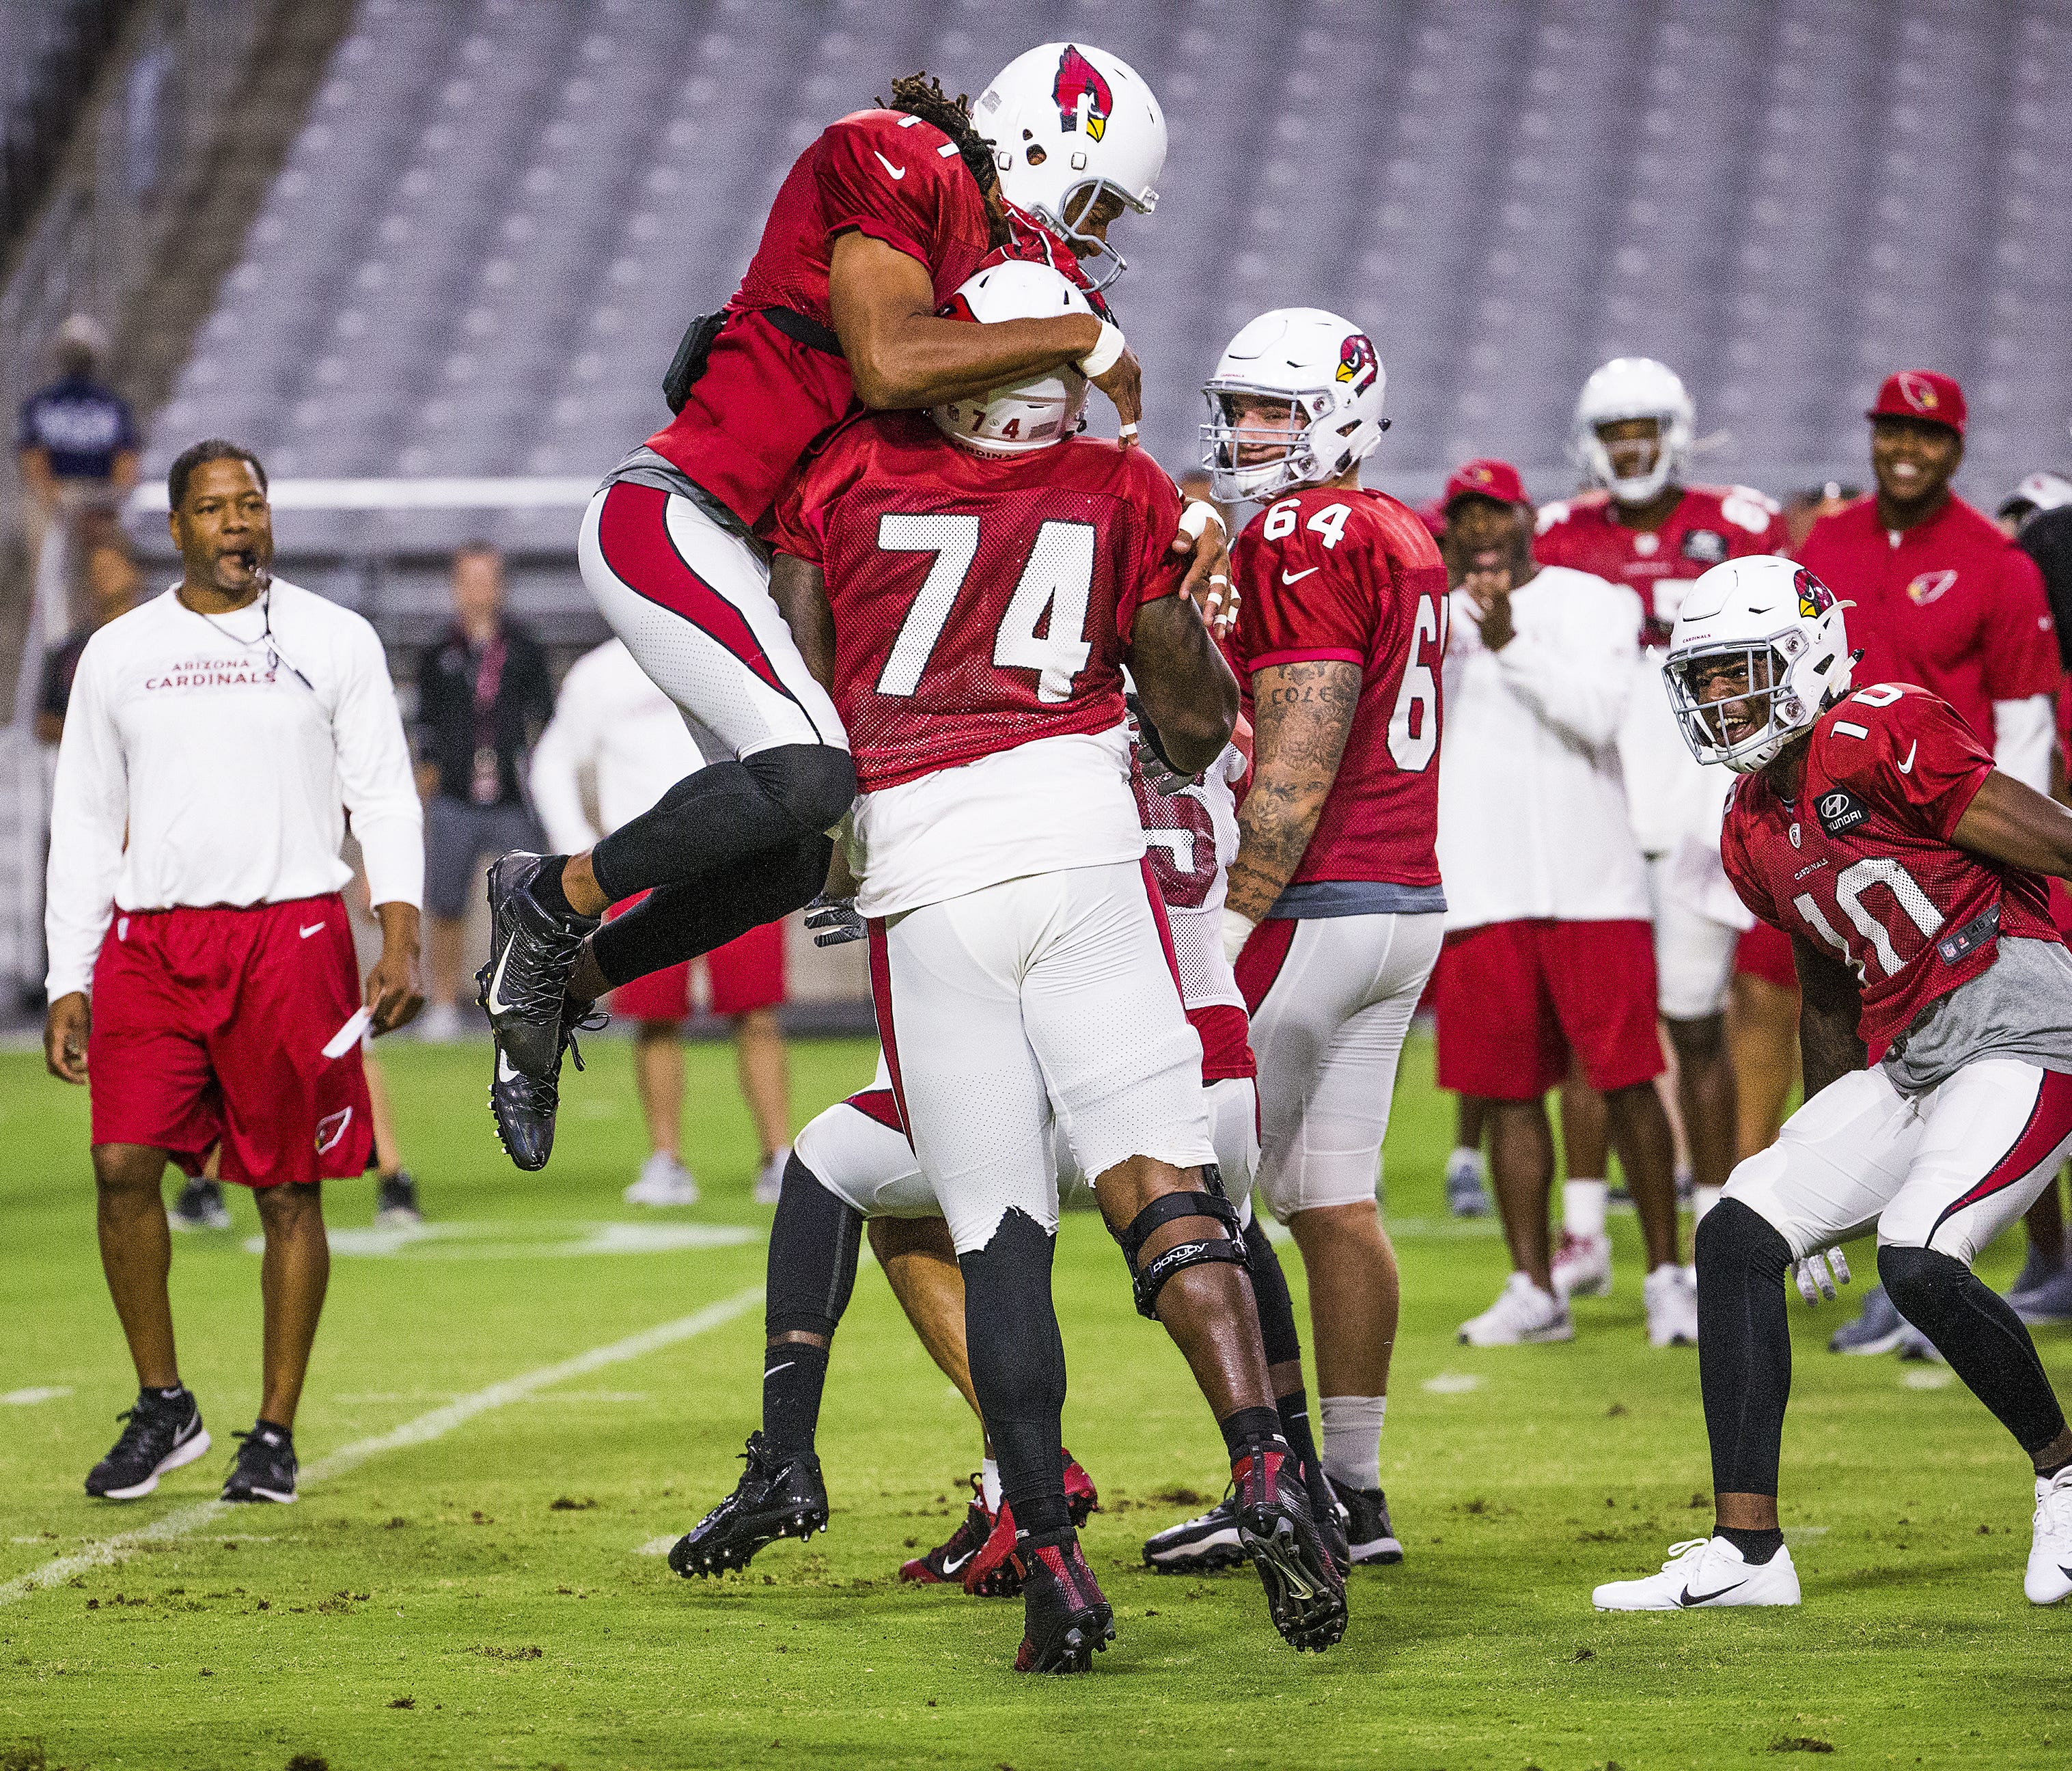 The Arizona Cardinals continue camp at University of Phoenix Stadium in Glendale, Monday, July 30, 2018.  Wide receiver Larry Fitzgerald jumps on top of offensive lineman D.J. Humphries after Humphries blocked defensive end Chandler Jones during one-